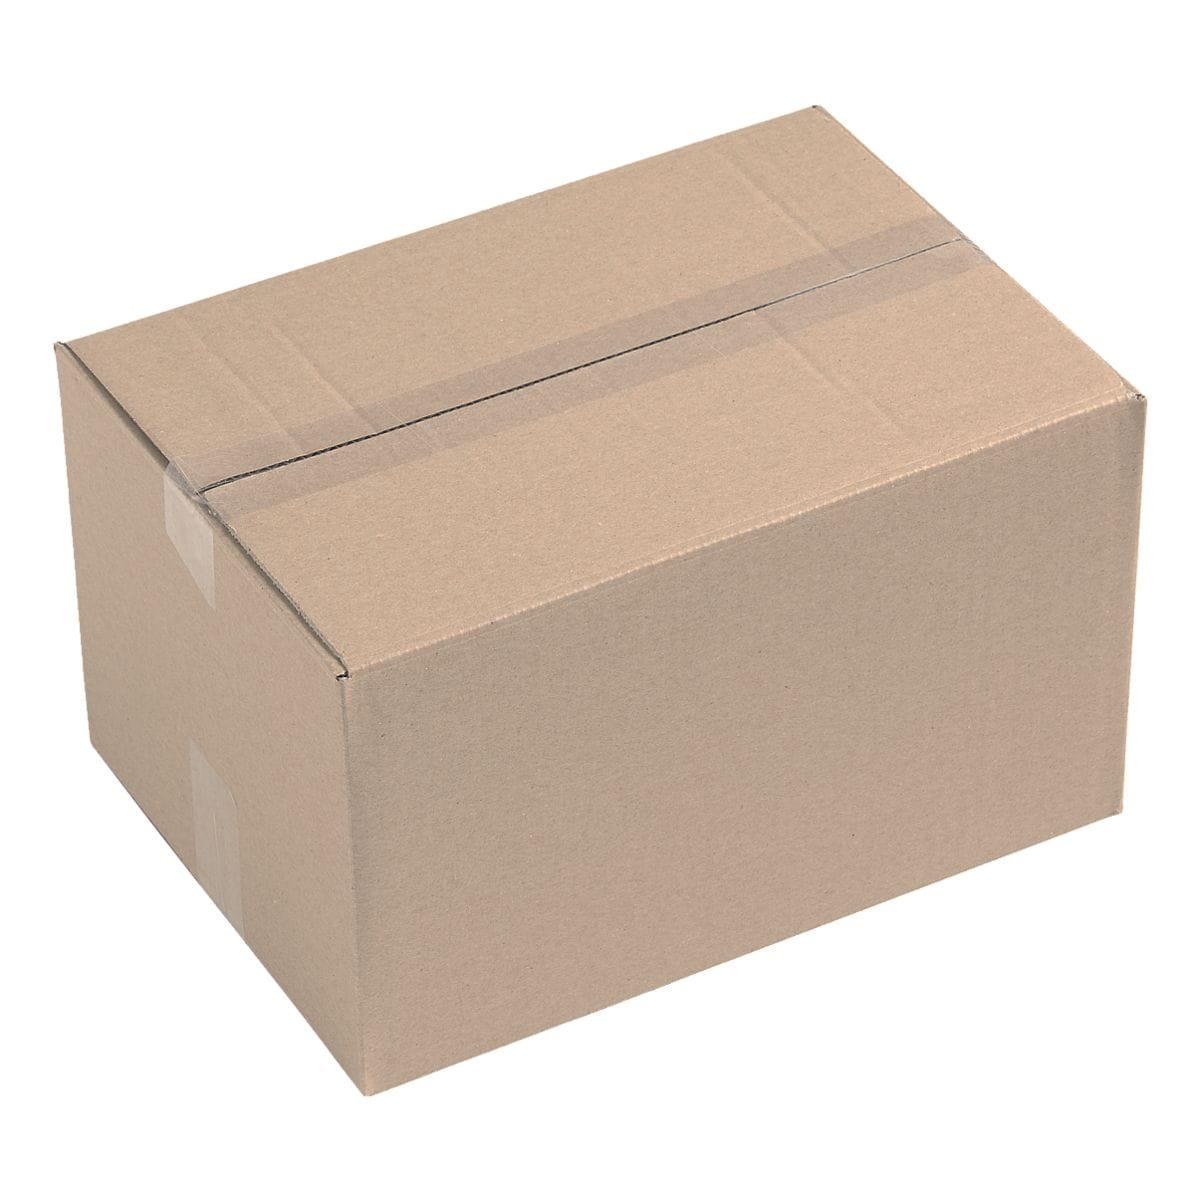 Quali Well Cartons d'expdition 30,5/21,5/18,0 cm - 20 pices